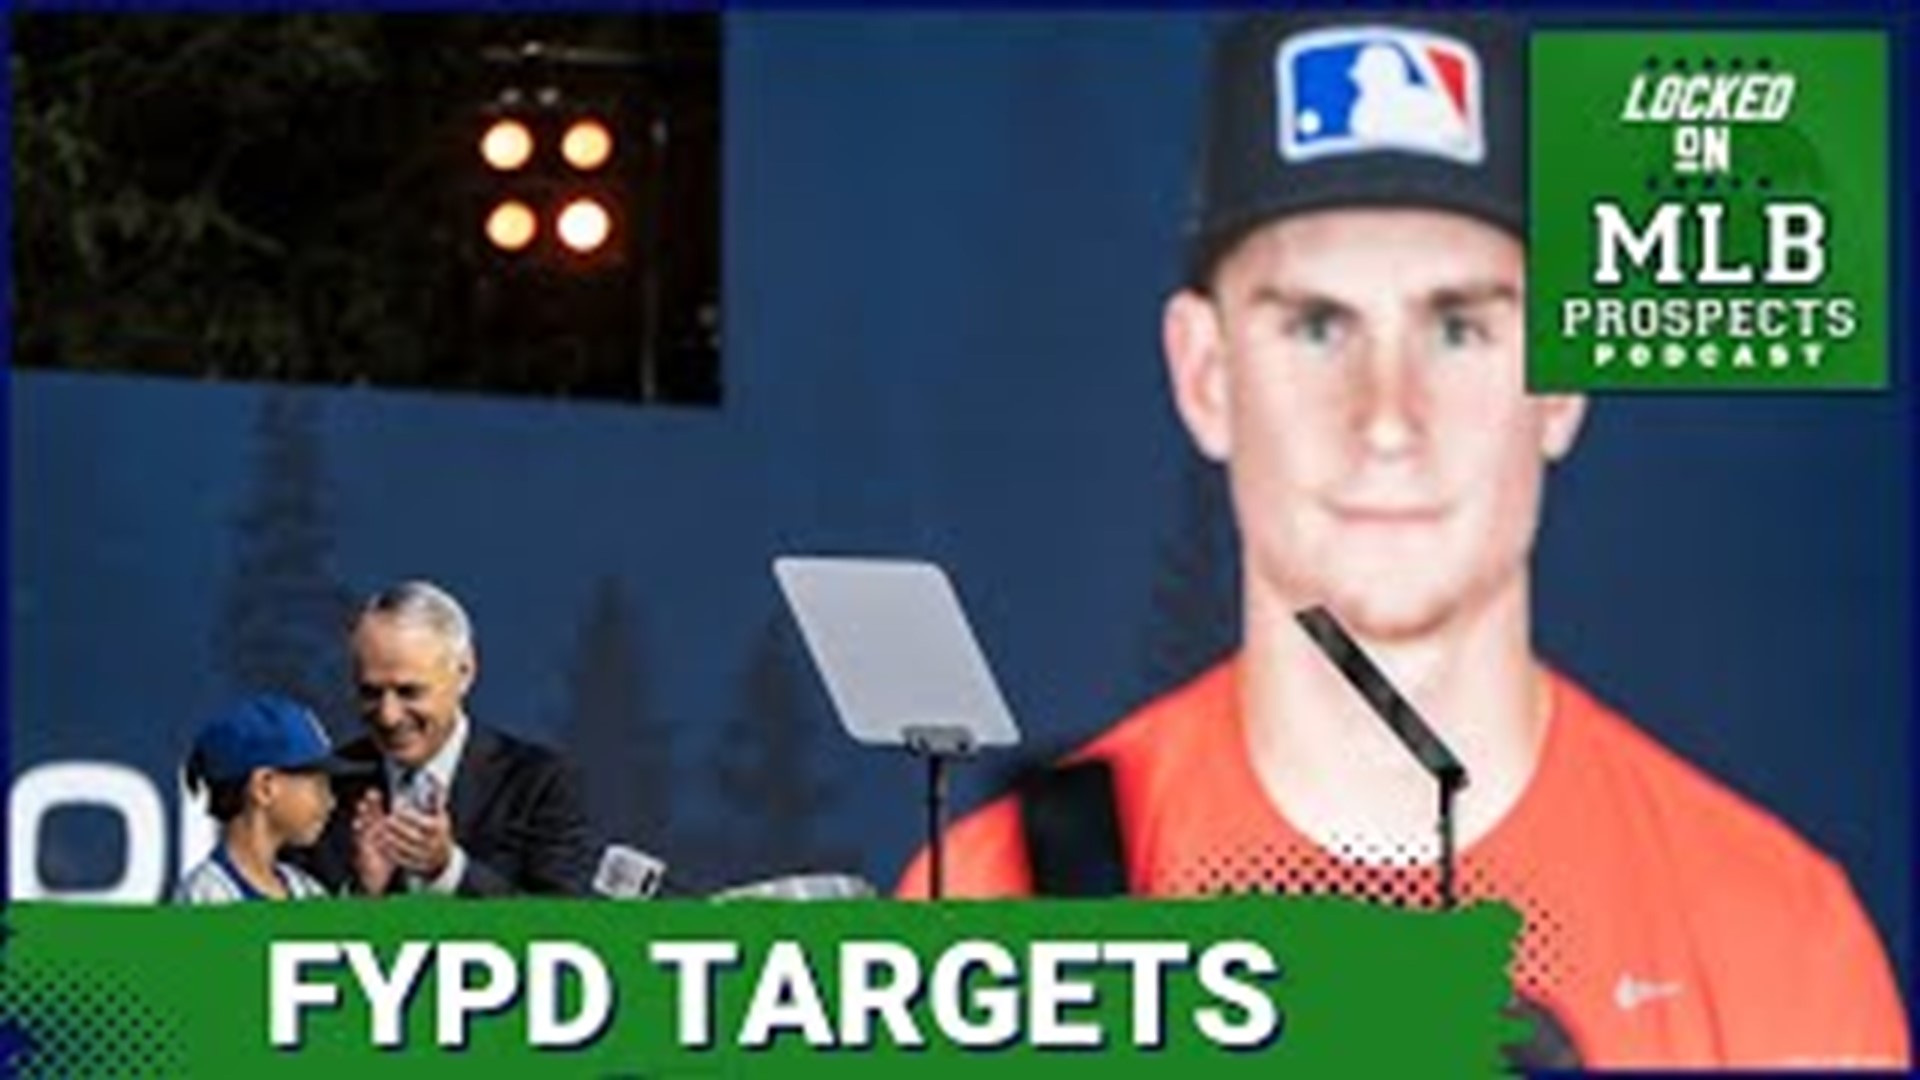 In this episode, the host Lindsay Crosby discusses first year player drafts (FYPDs) preferences in fantasy baseball, focusing specifically on those this spring.